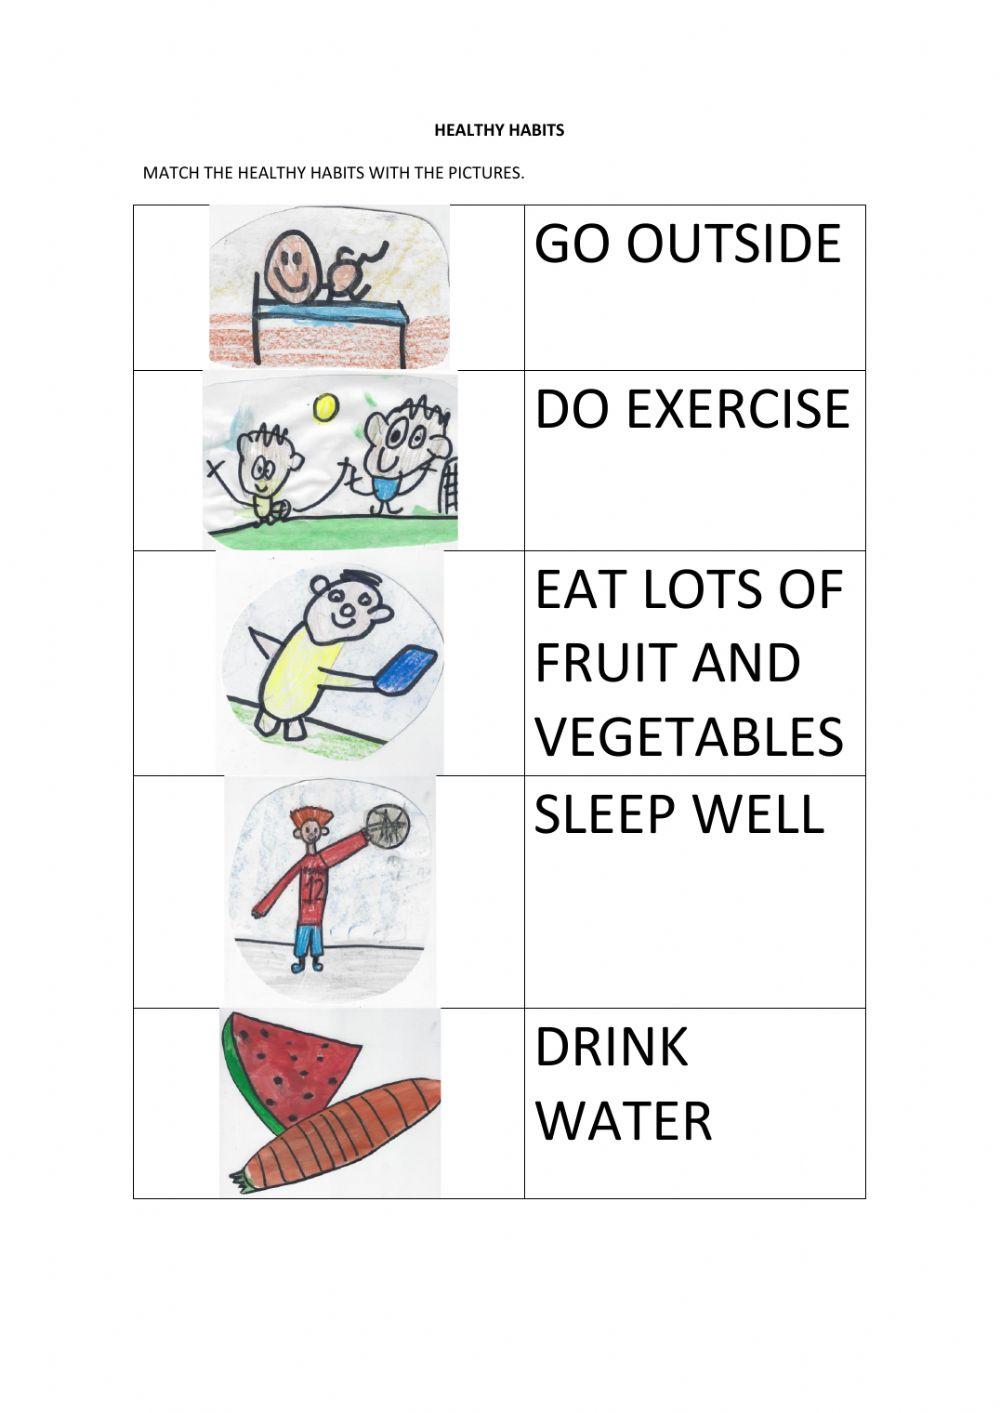 Healthy habits matching exercise